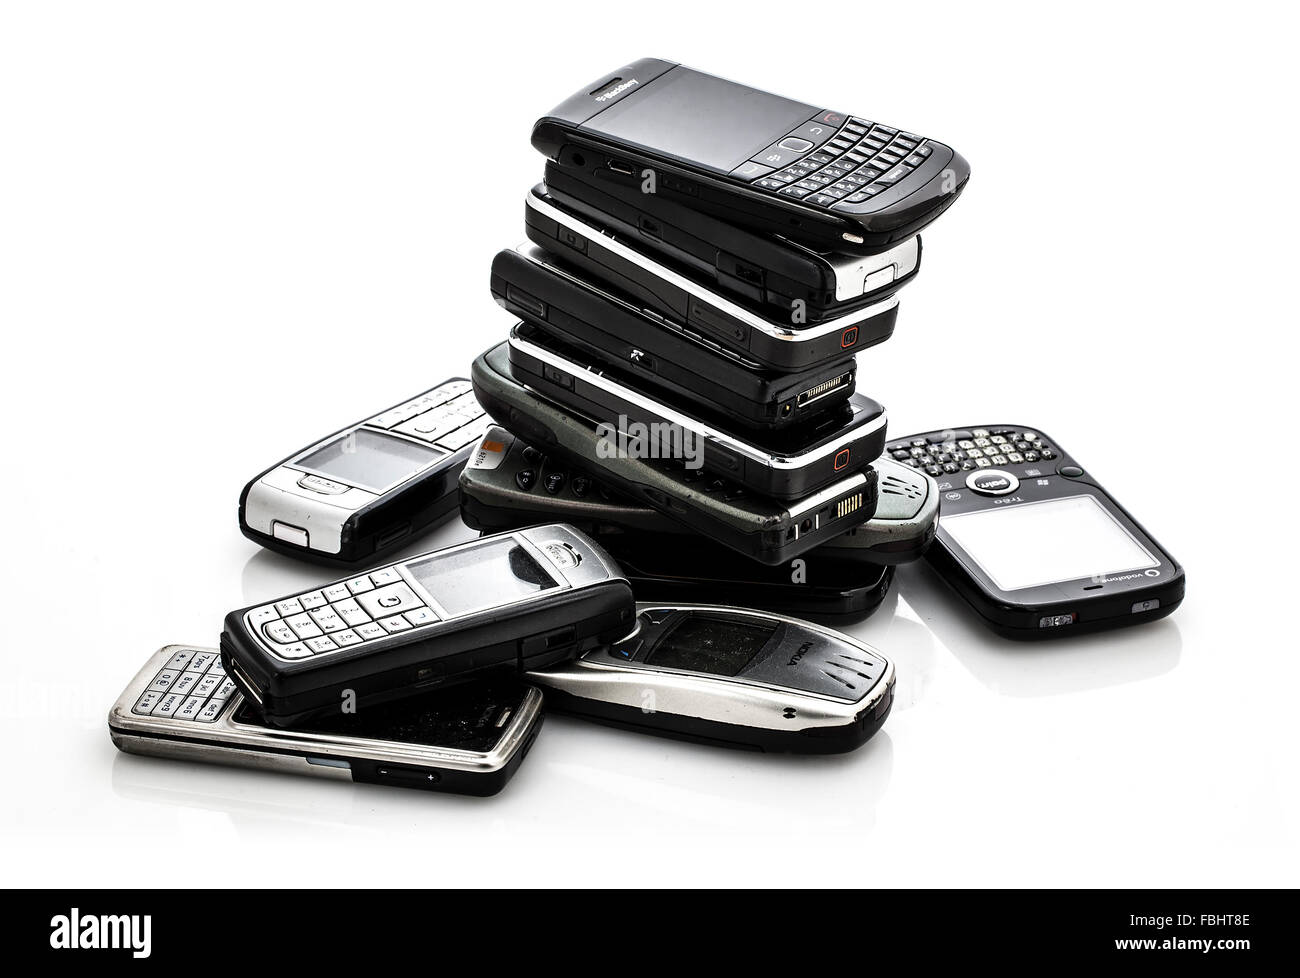 Pile of Old Mobile Phones ready for recycling on a white background Stock Photo